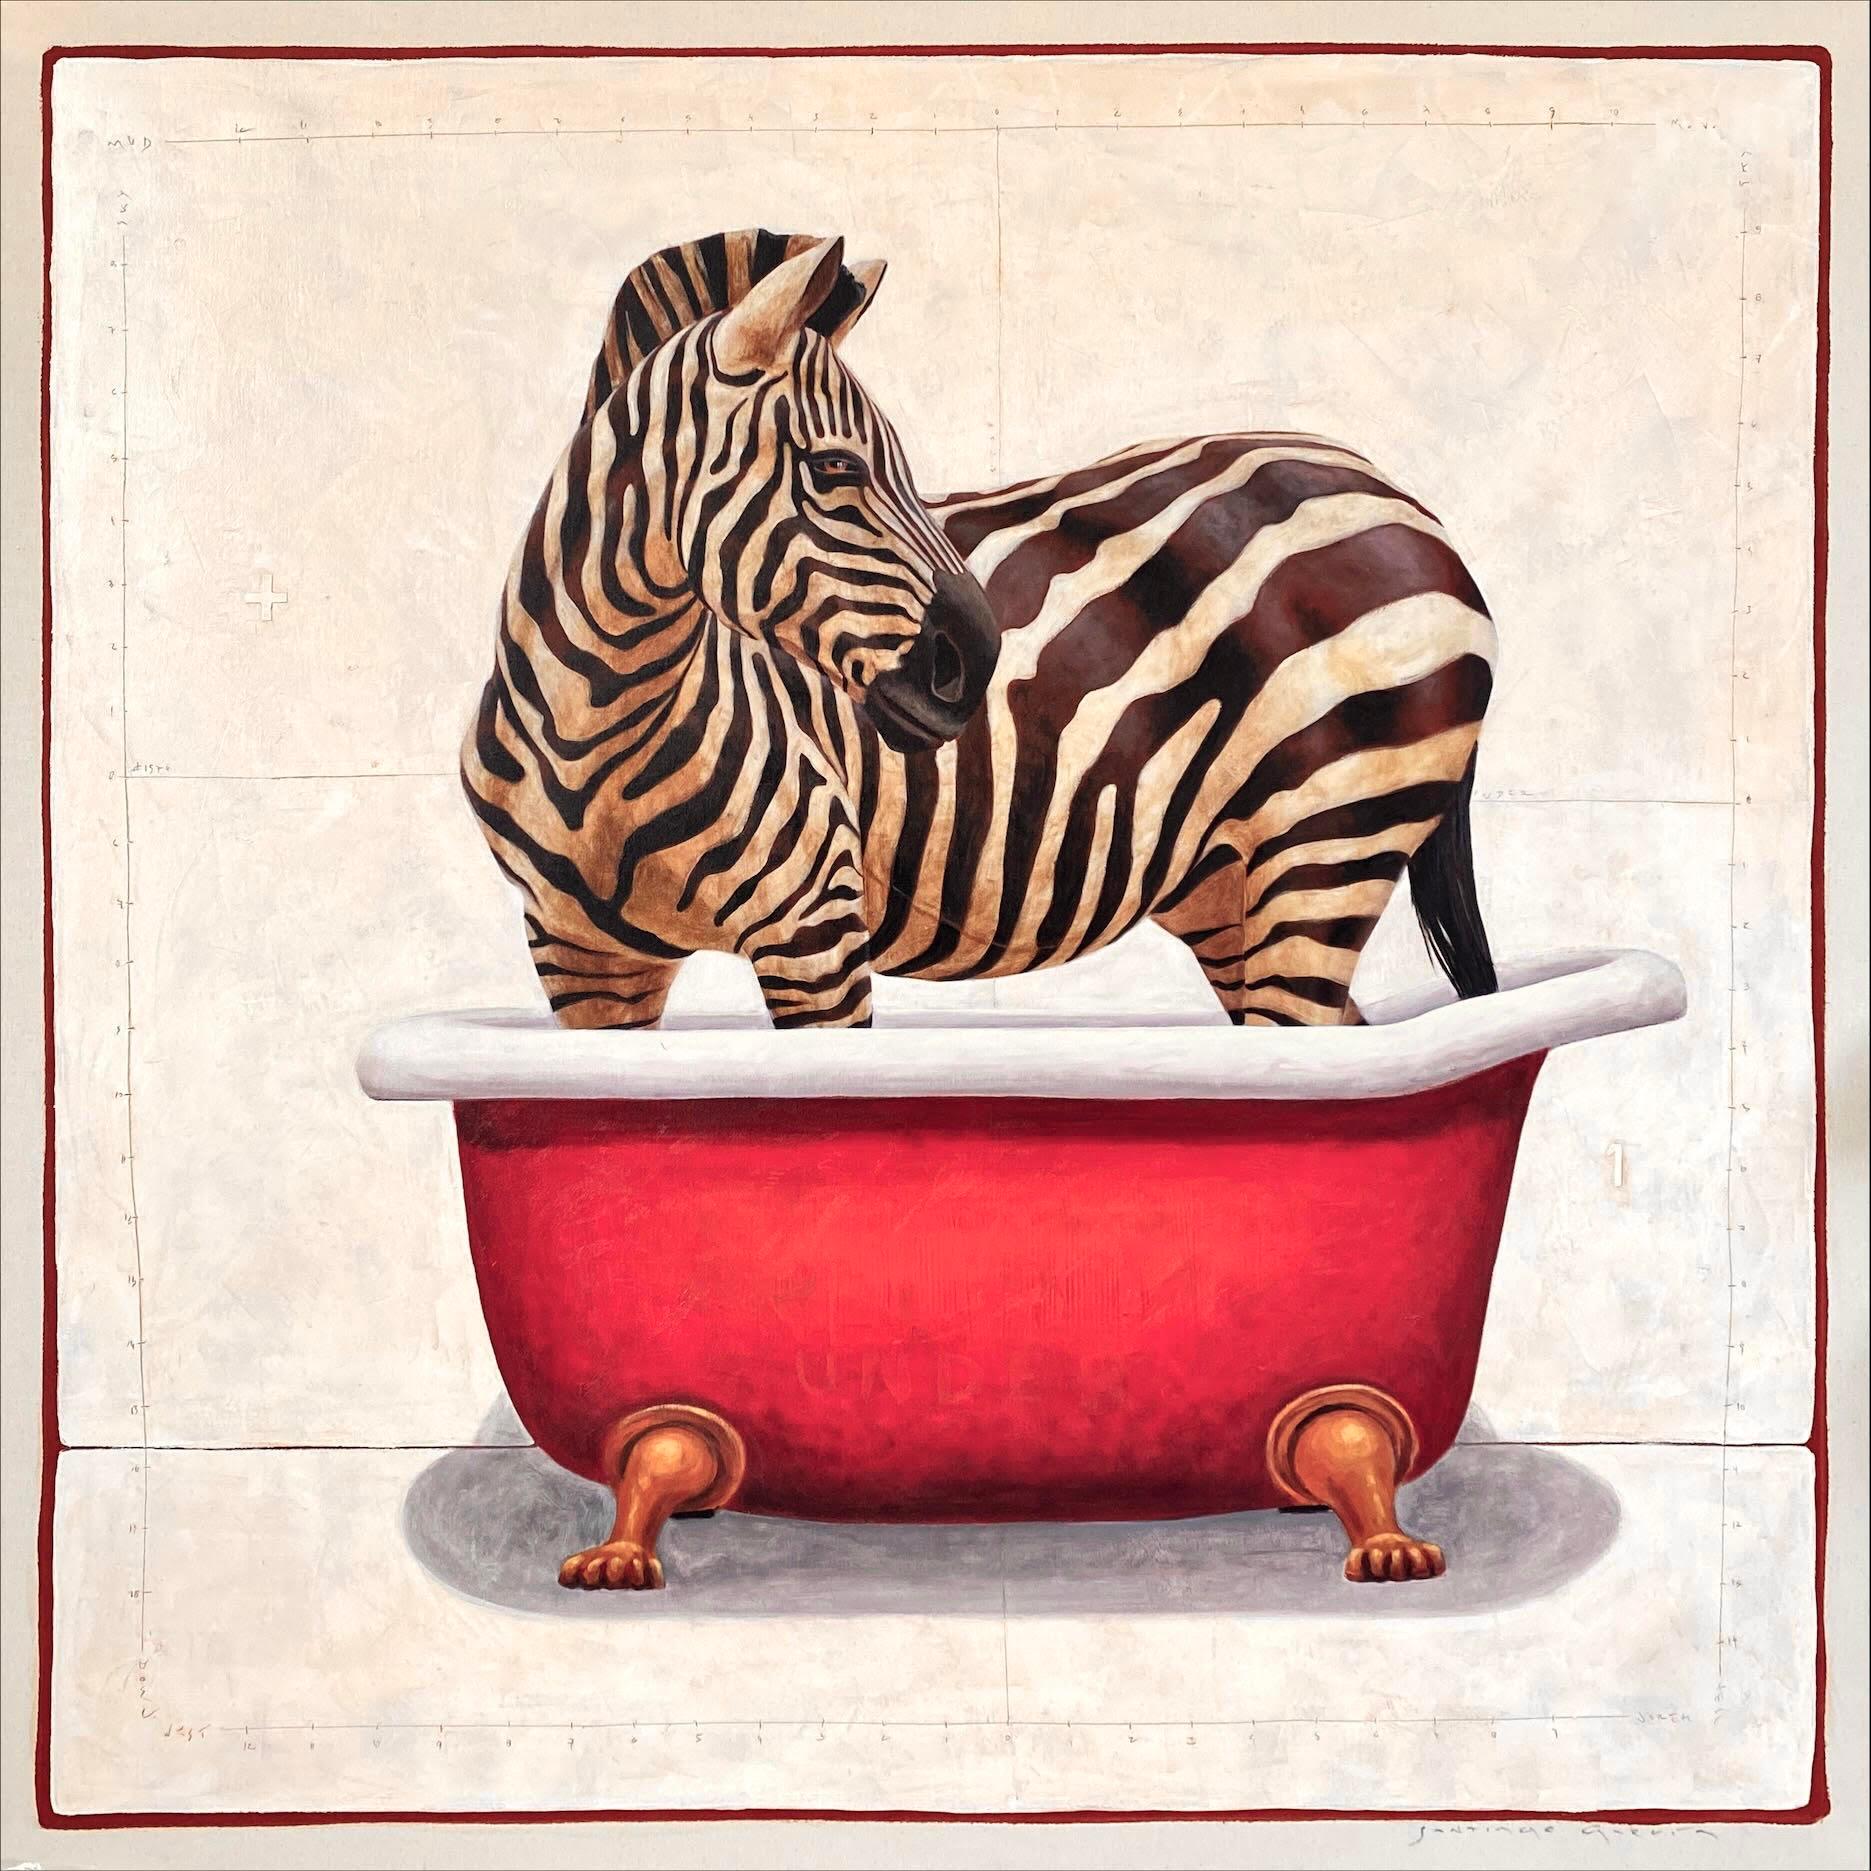 Santiago Garcia Animal Painting - "#1570" acrylic painting of a black and white zebra standing in a red bath tub